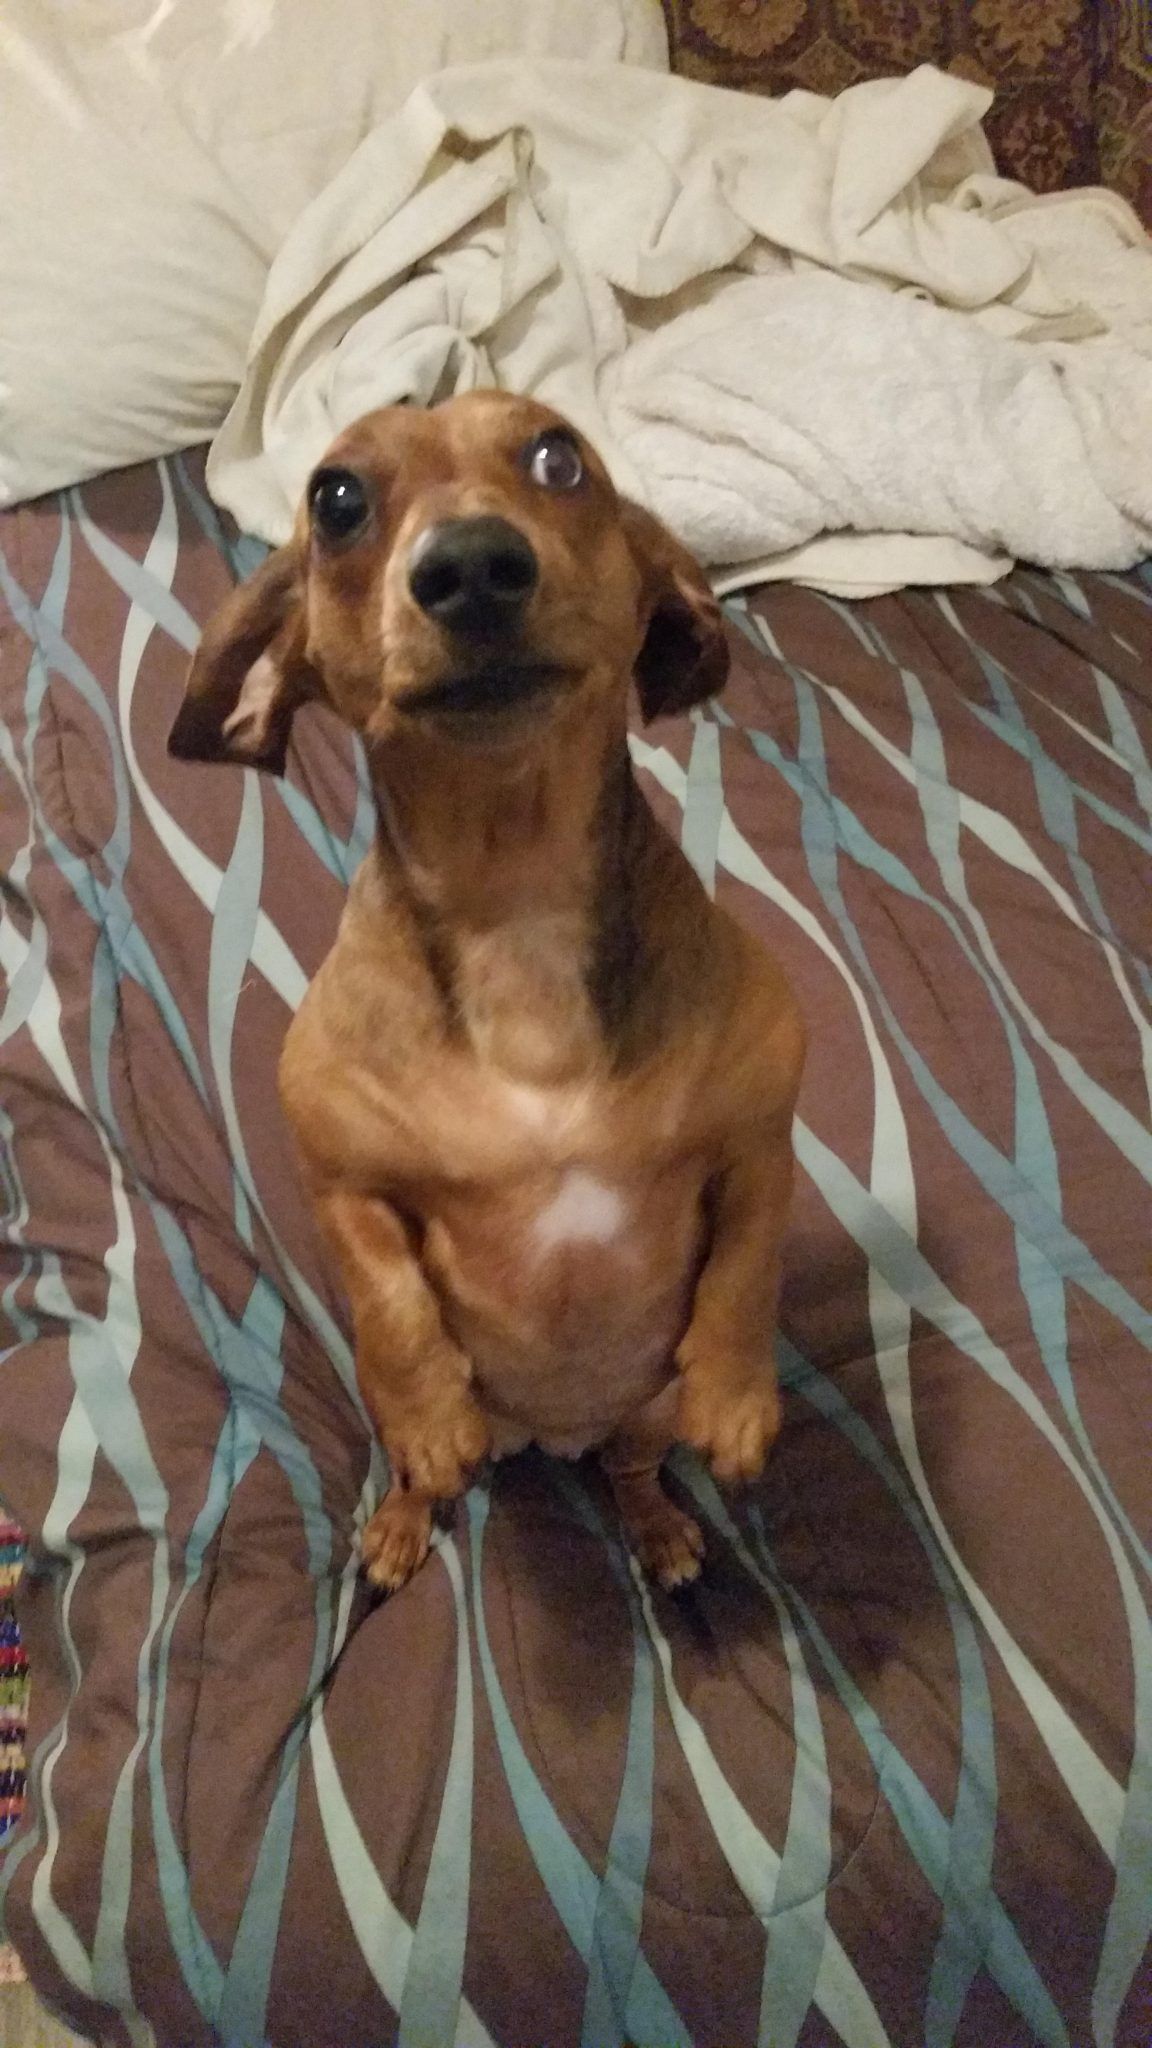 My roommates dog begs like dobby the house elf | Roommate, Weiner ...